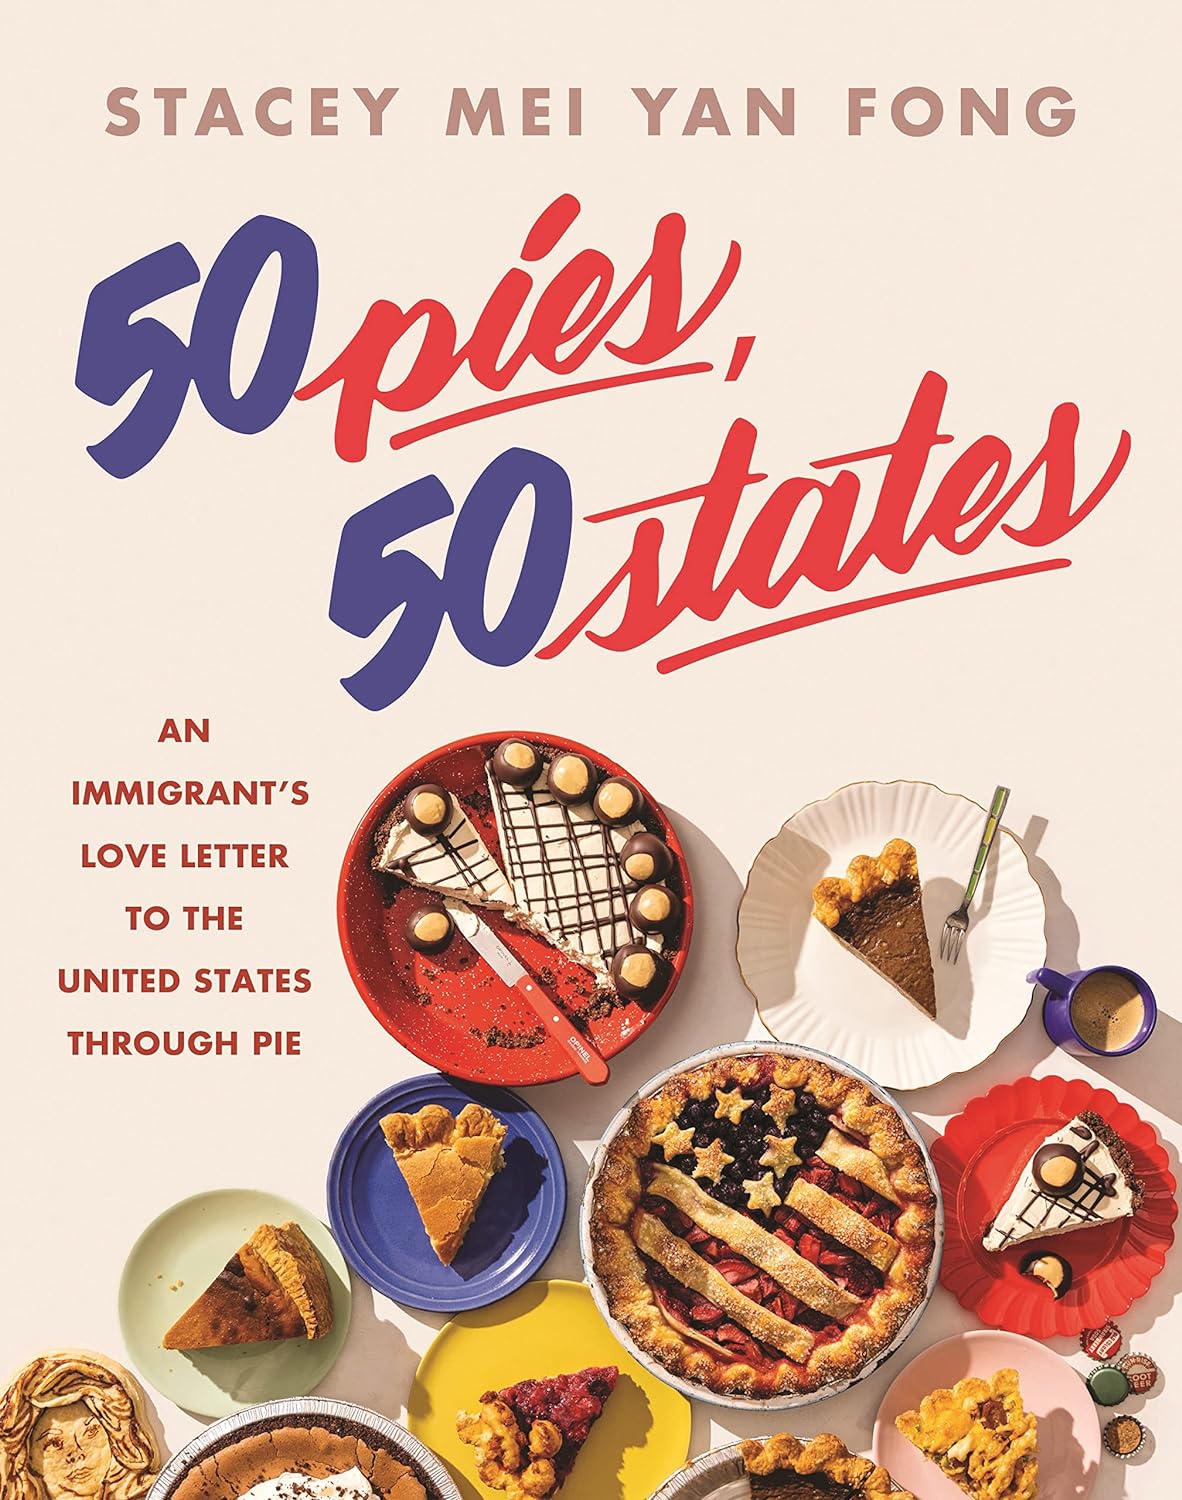 50 Pies, 50 States: An Immigrant's Love Letter to the United States Through Pie - Stacey Mei Yan Fong